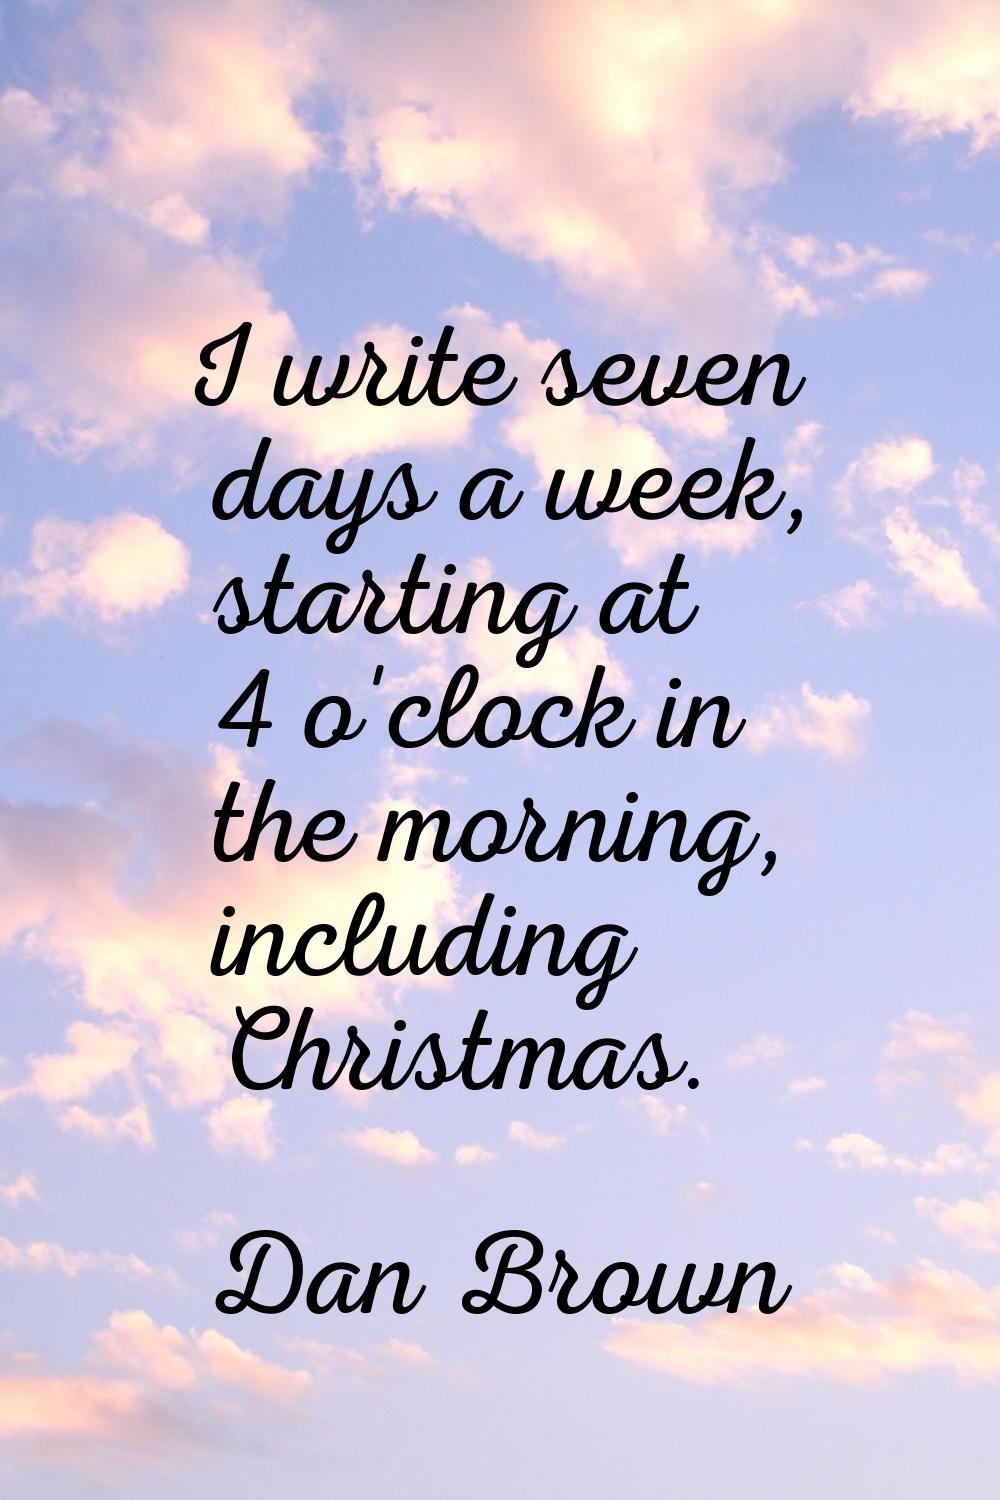 I write seven days a week, starting at 4 o'clock in the morning, including Christmas.